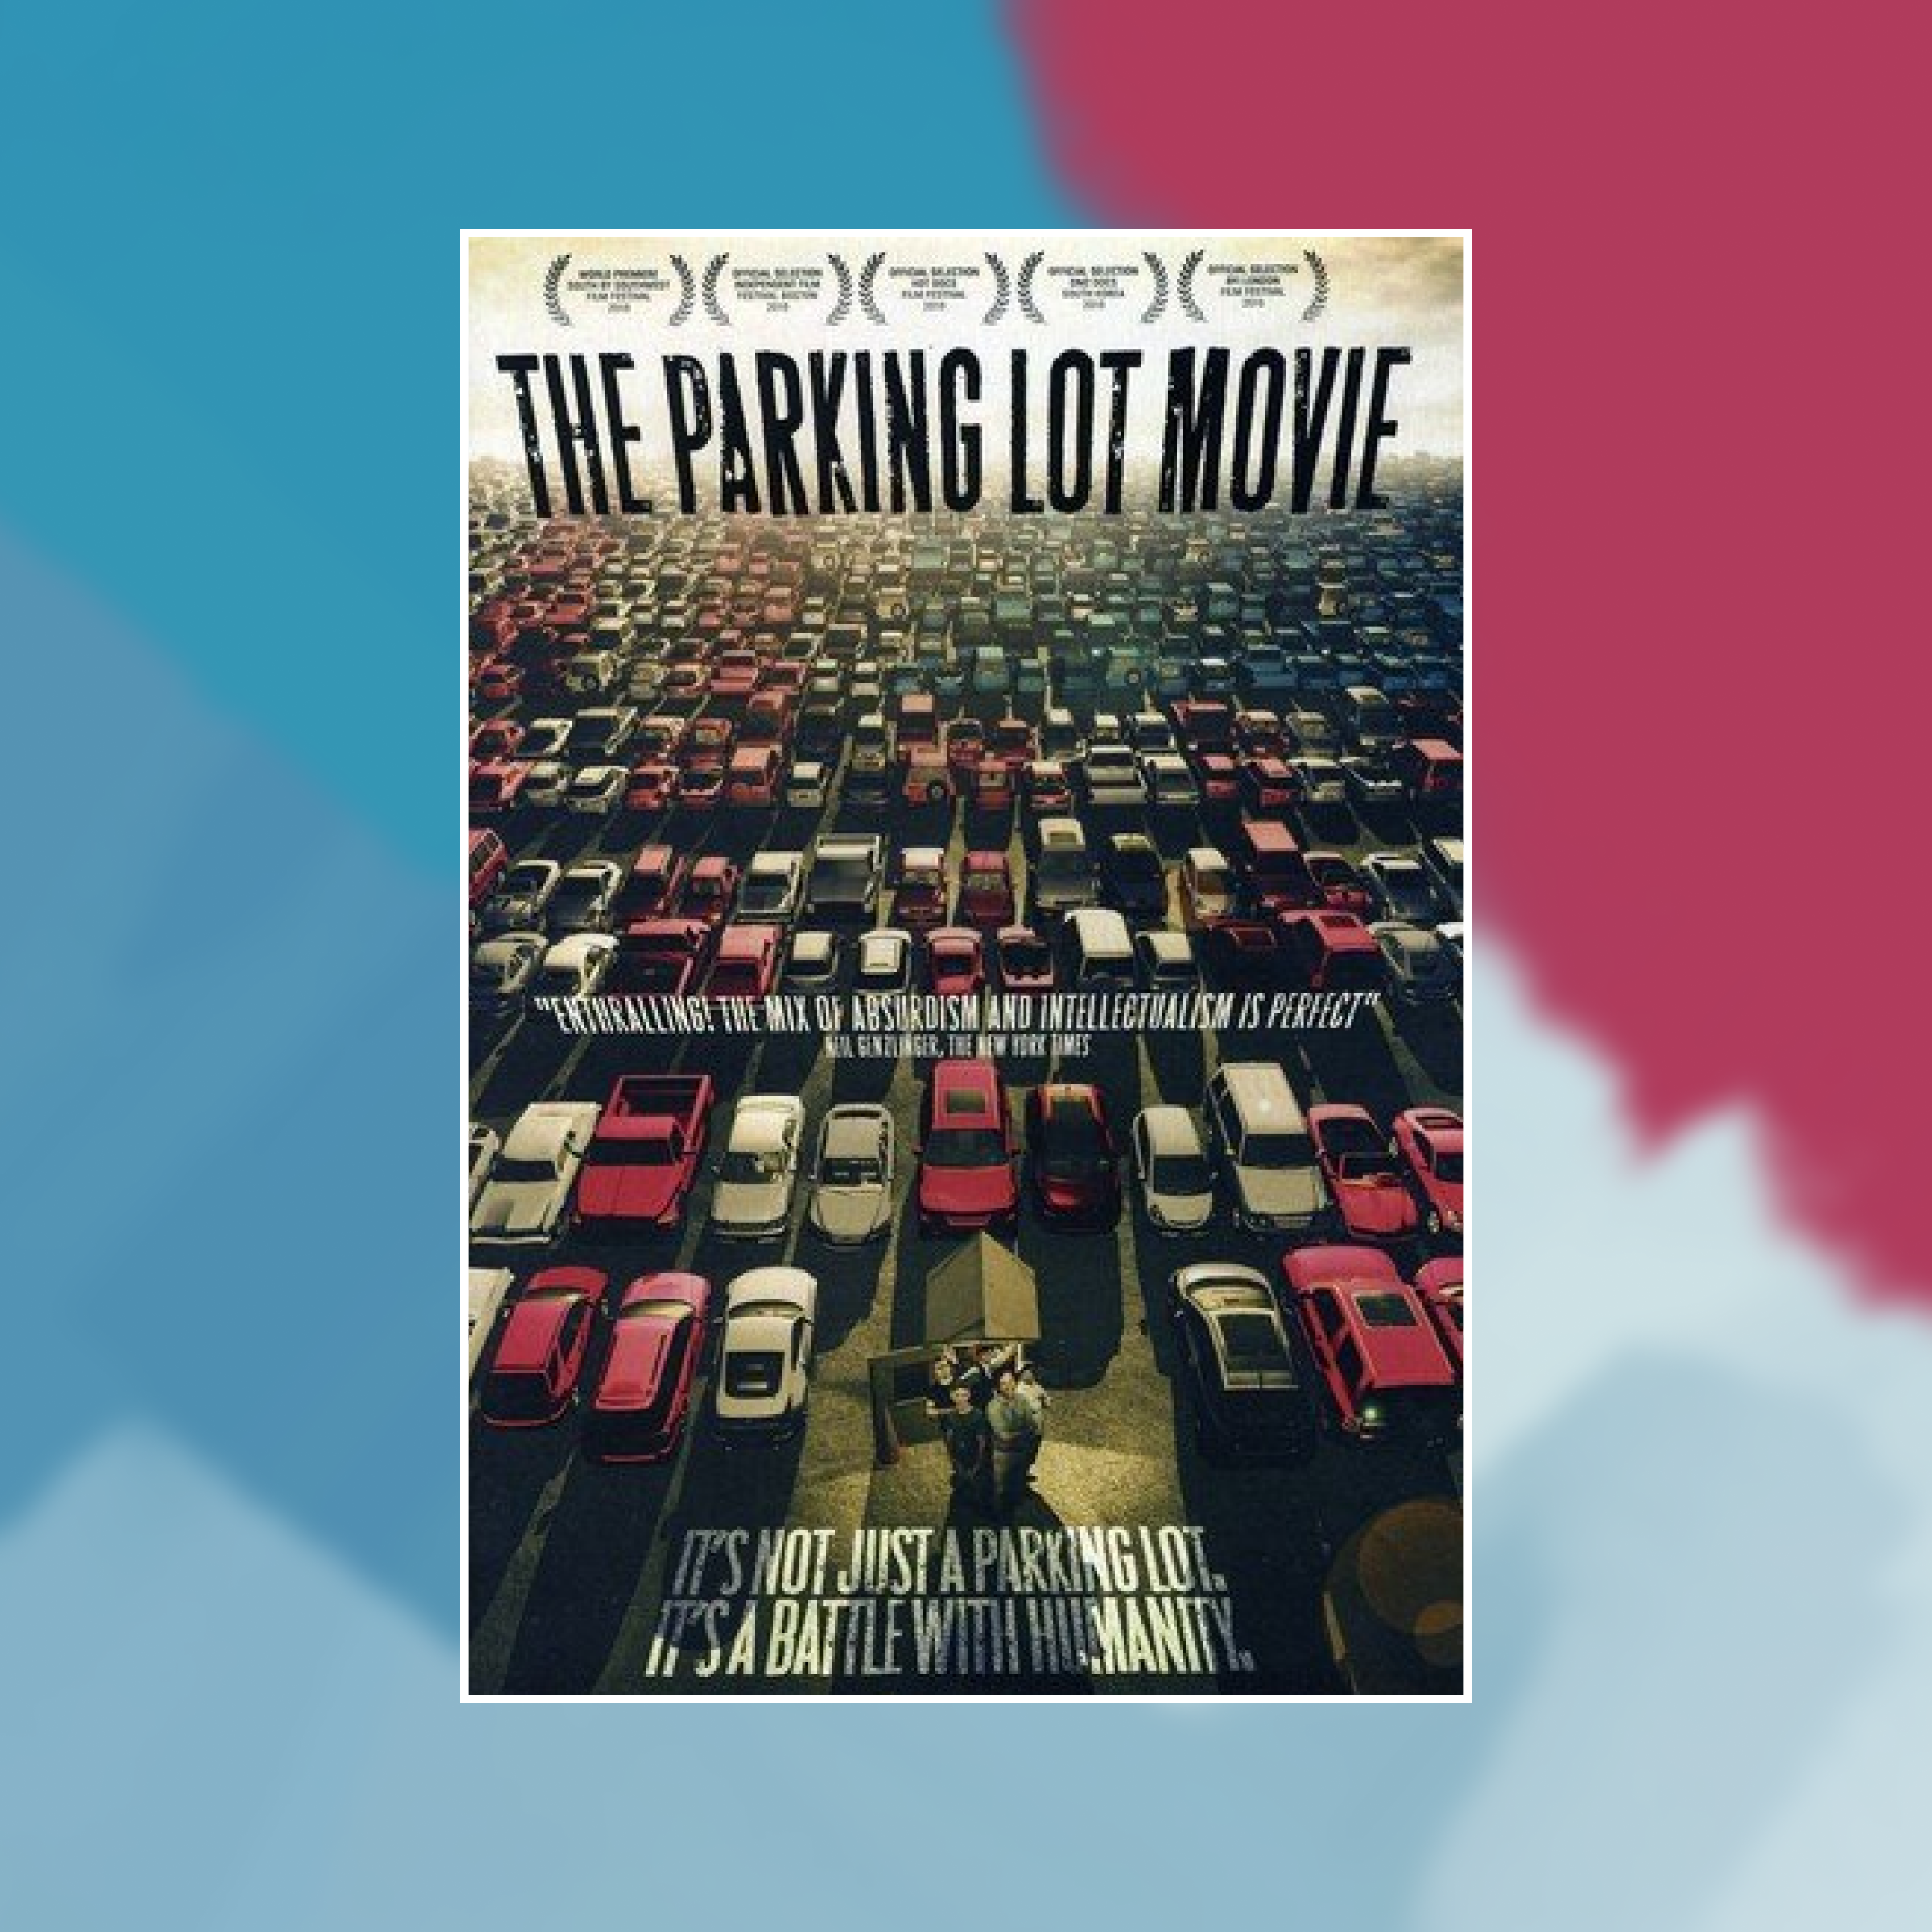 Movie cover of The Parking Lot Movie against an abstract painted background